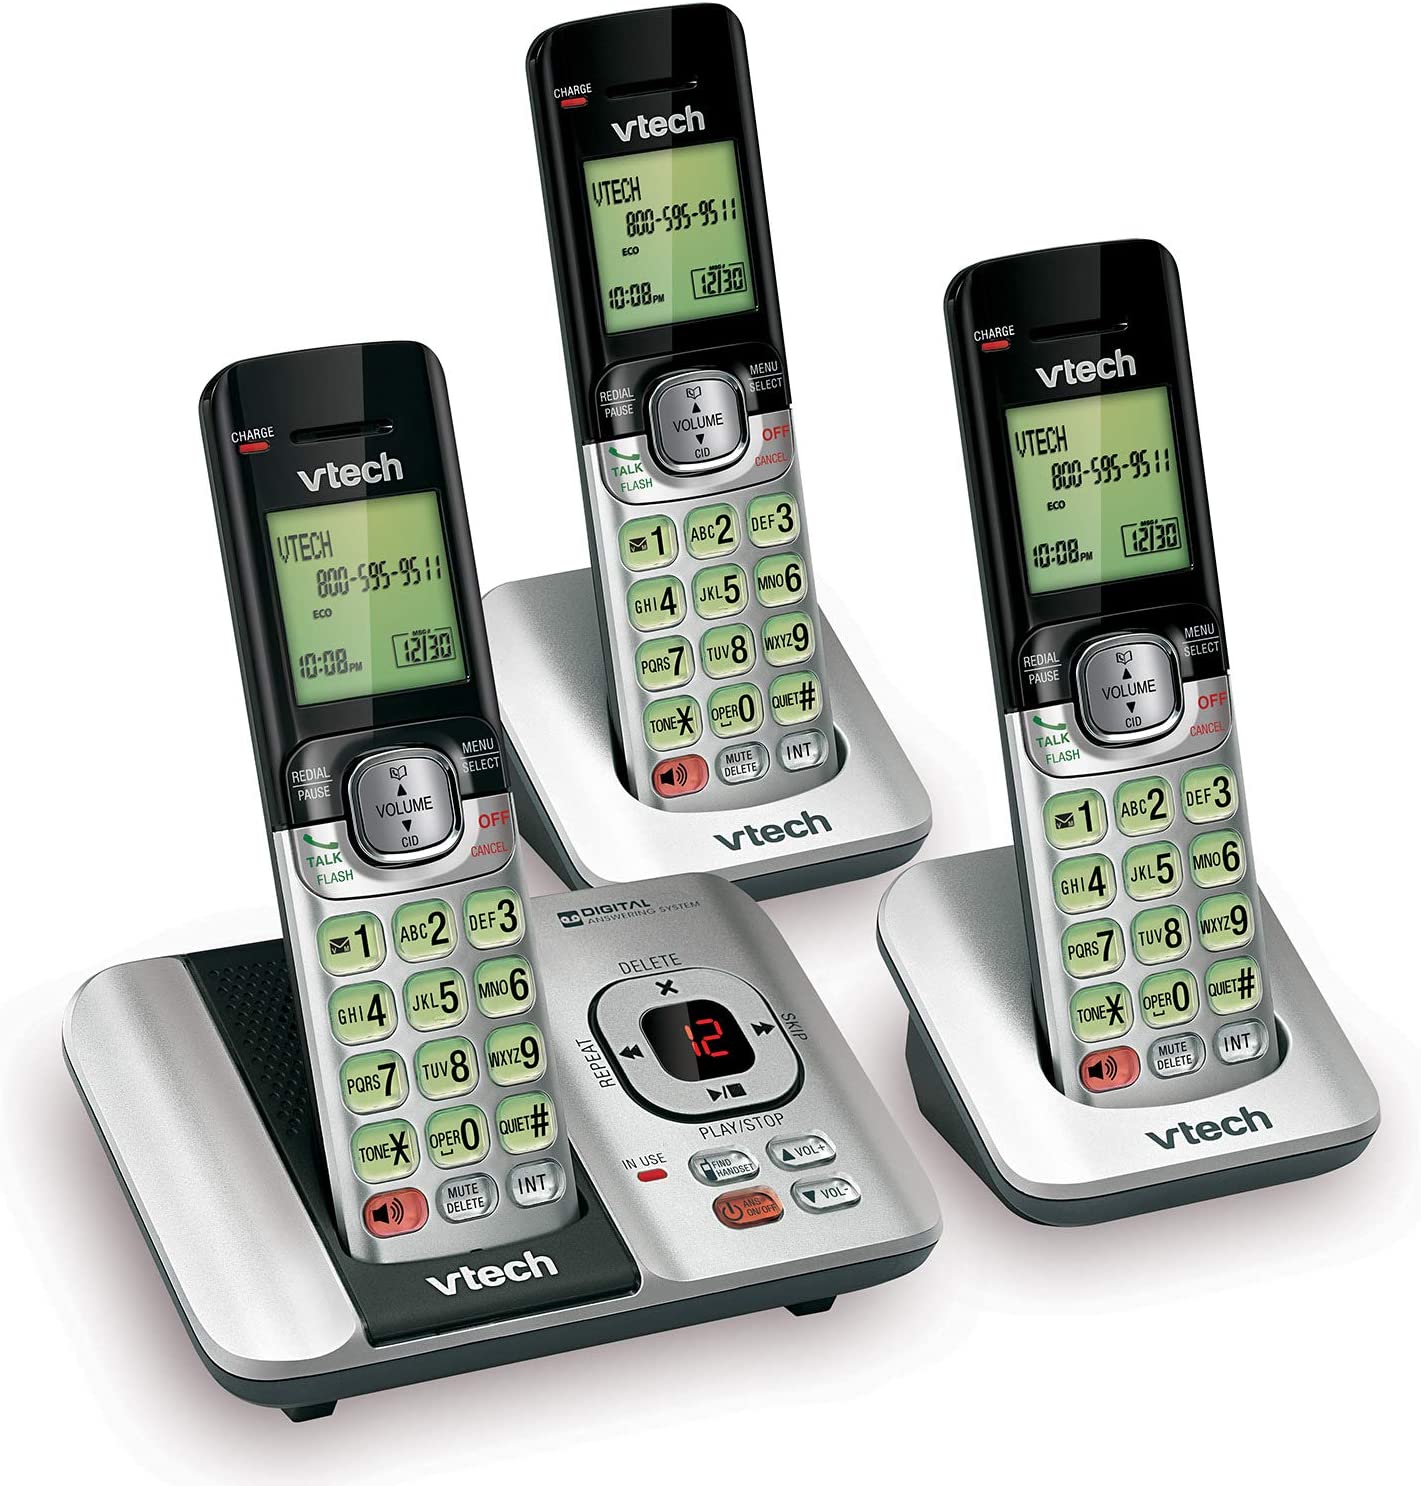 VTech CS6529-3 3-Handset DECT 6.0 Expandable Cordless Phone, Silver - with Answering System and Caller ID/Call Waiting